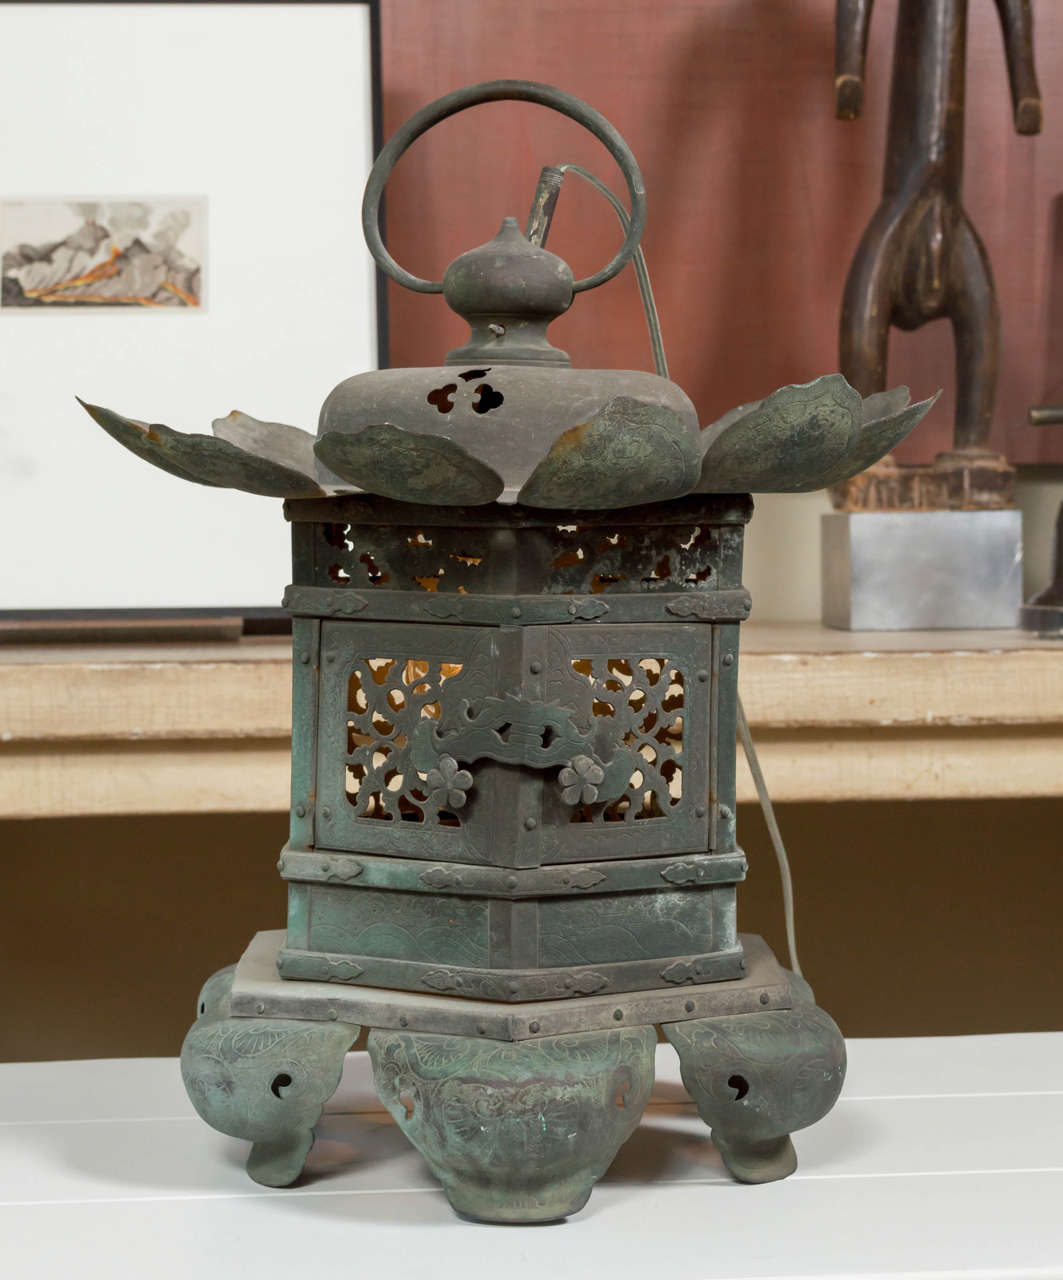 An Japanese patina aged bronze lantern with later wiring